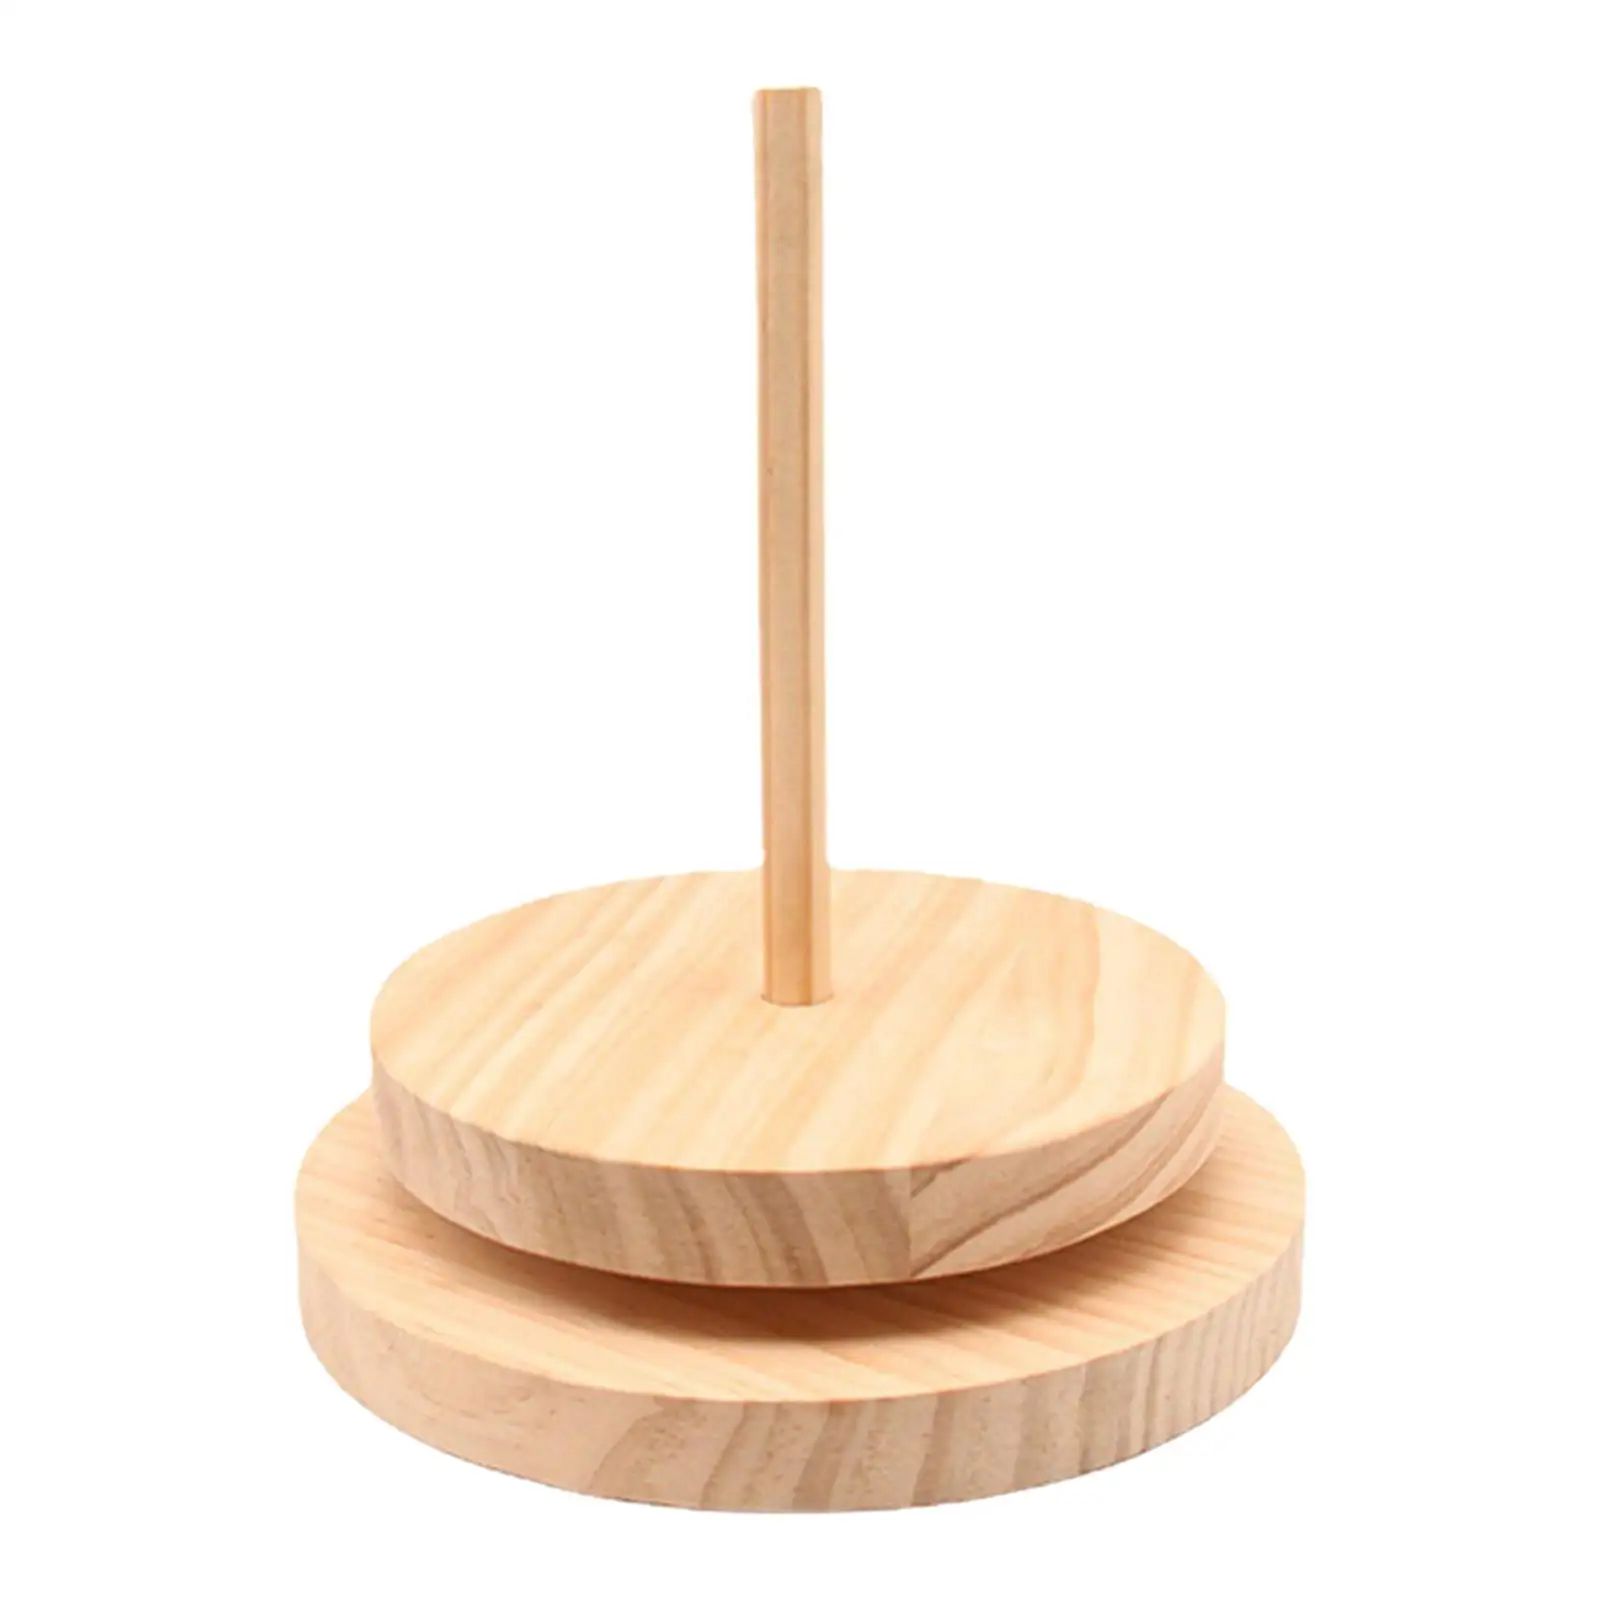 Wooden Yarn Ball Holder Thread Spool Crocheting Sewing Knitting Tools Stand Rope Storage Winder Rotation Spinning